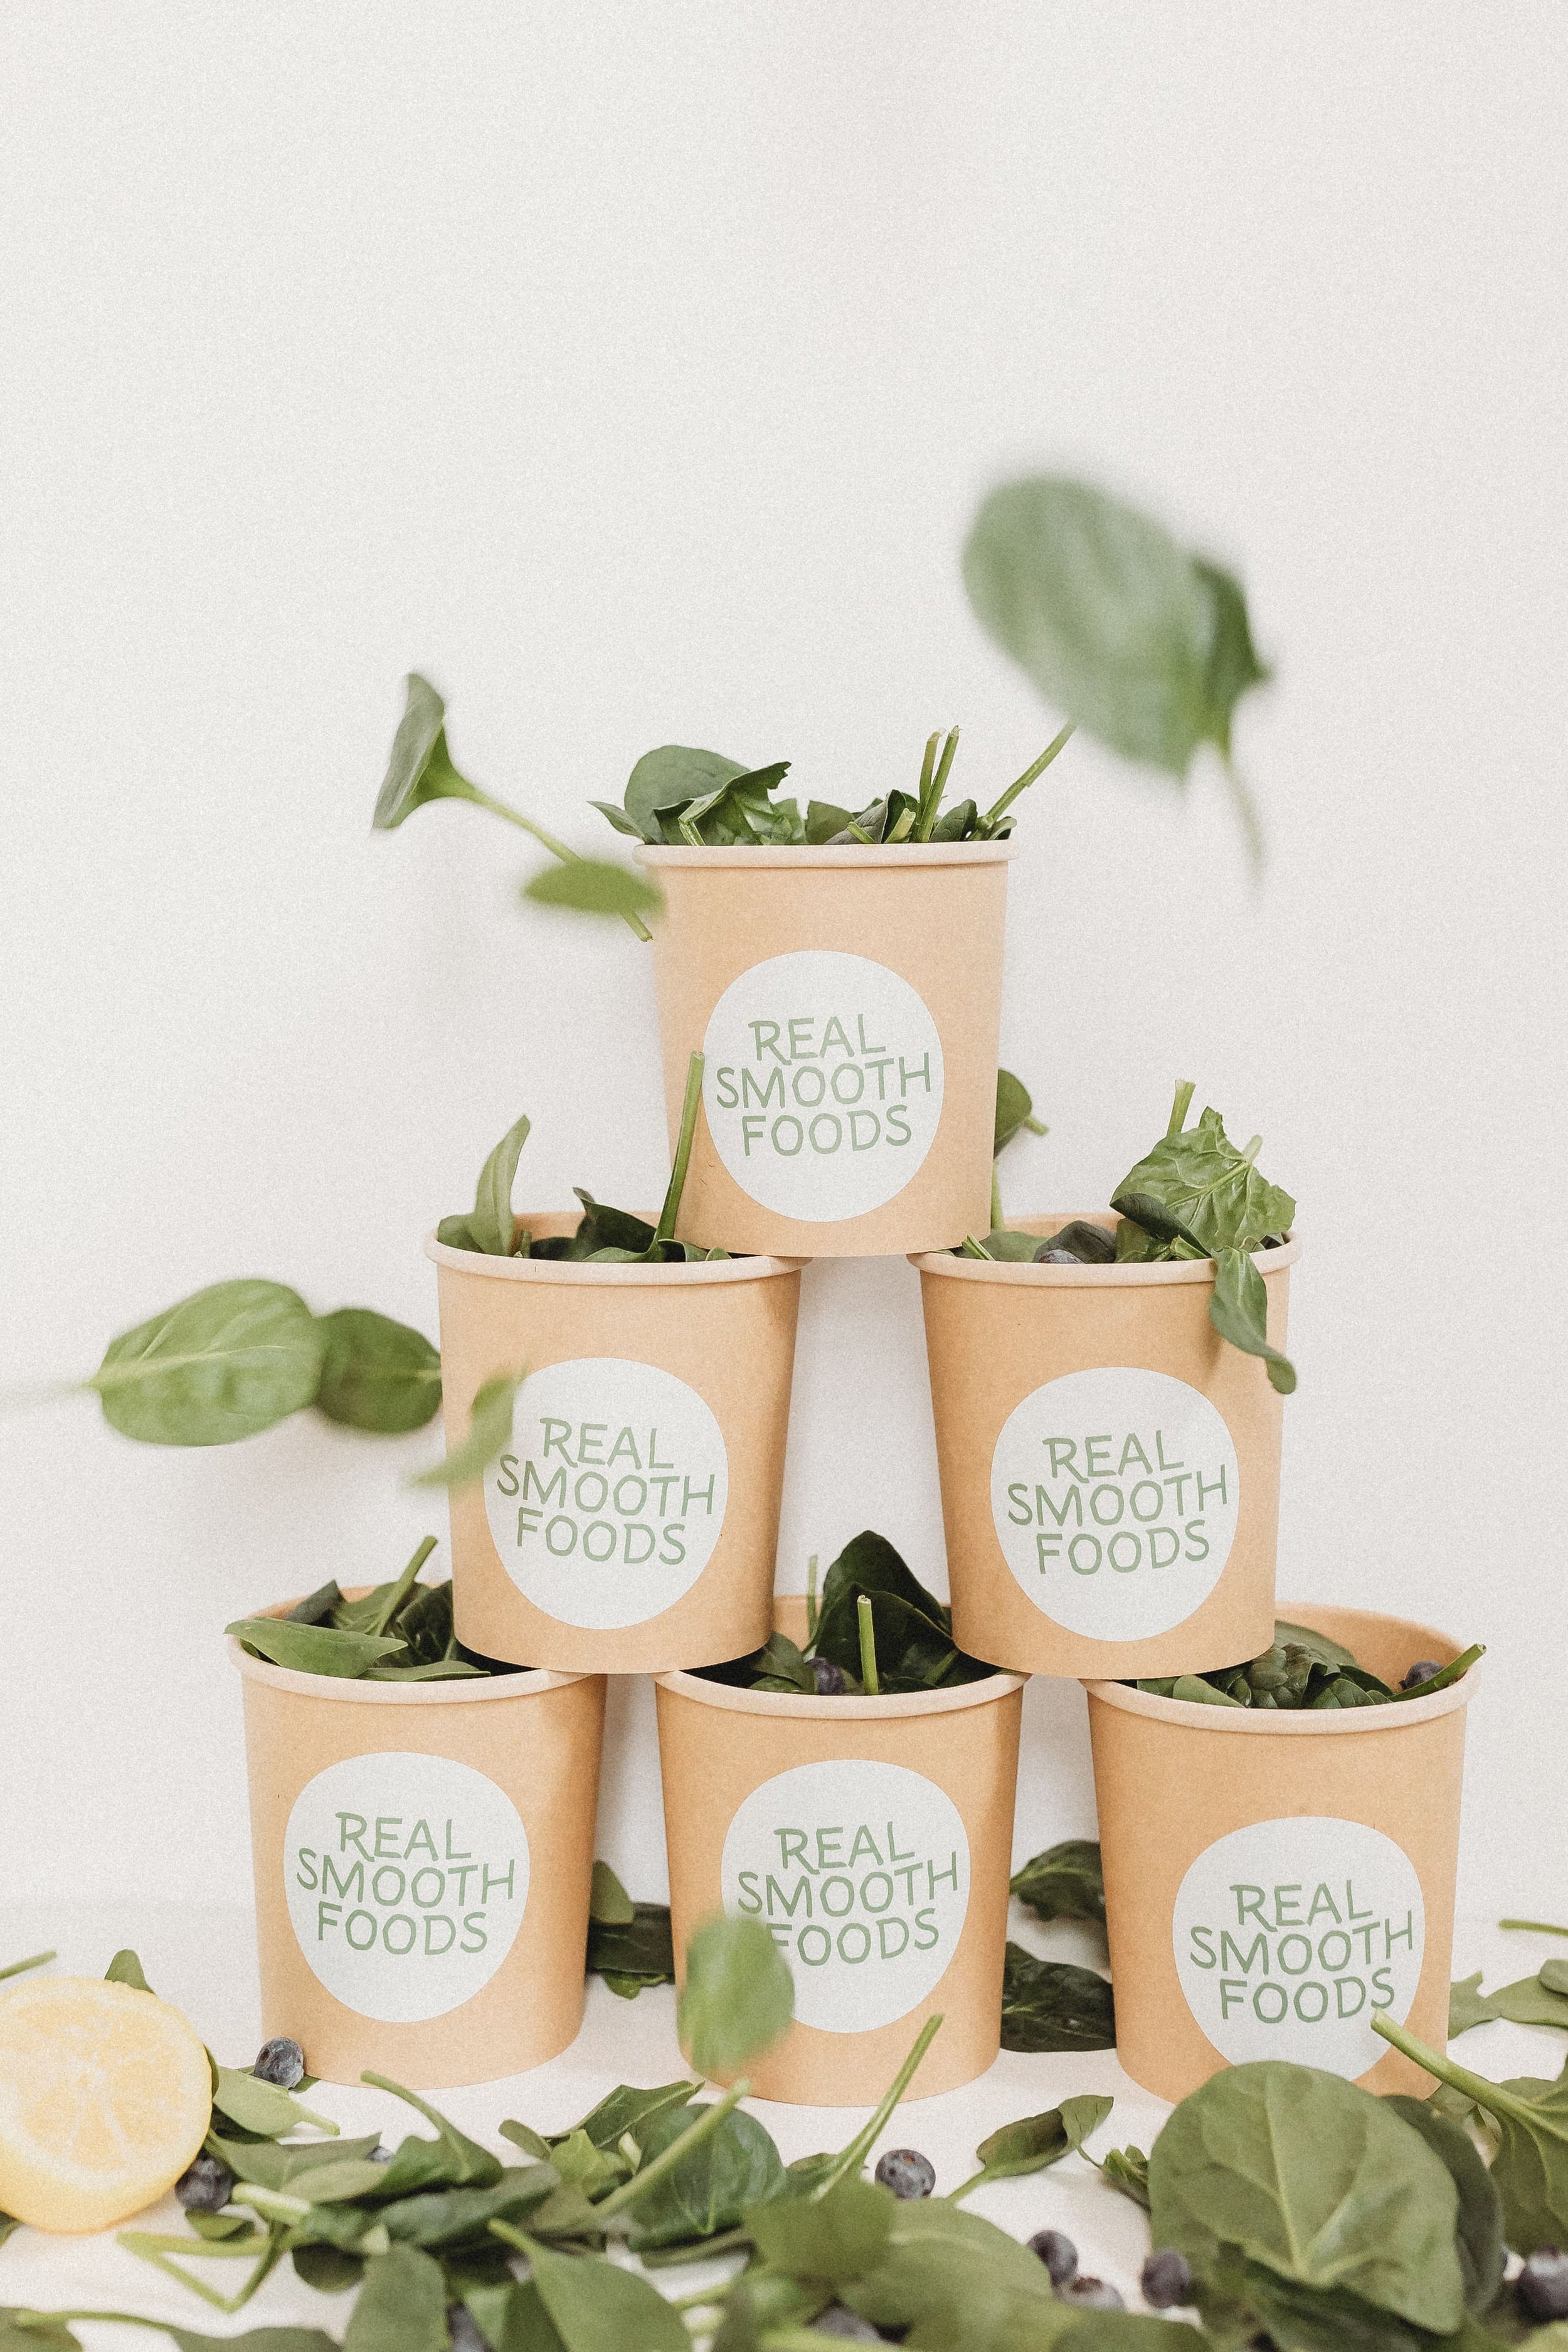  a stack of cups each full of spinach from real smooth foods brand shoot 